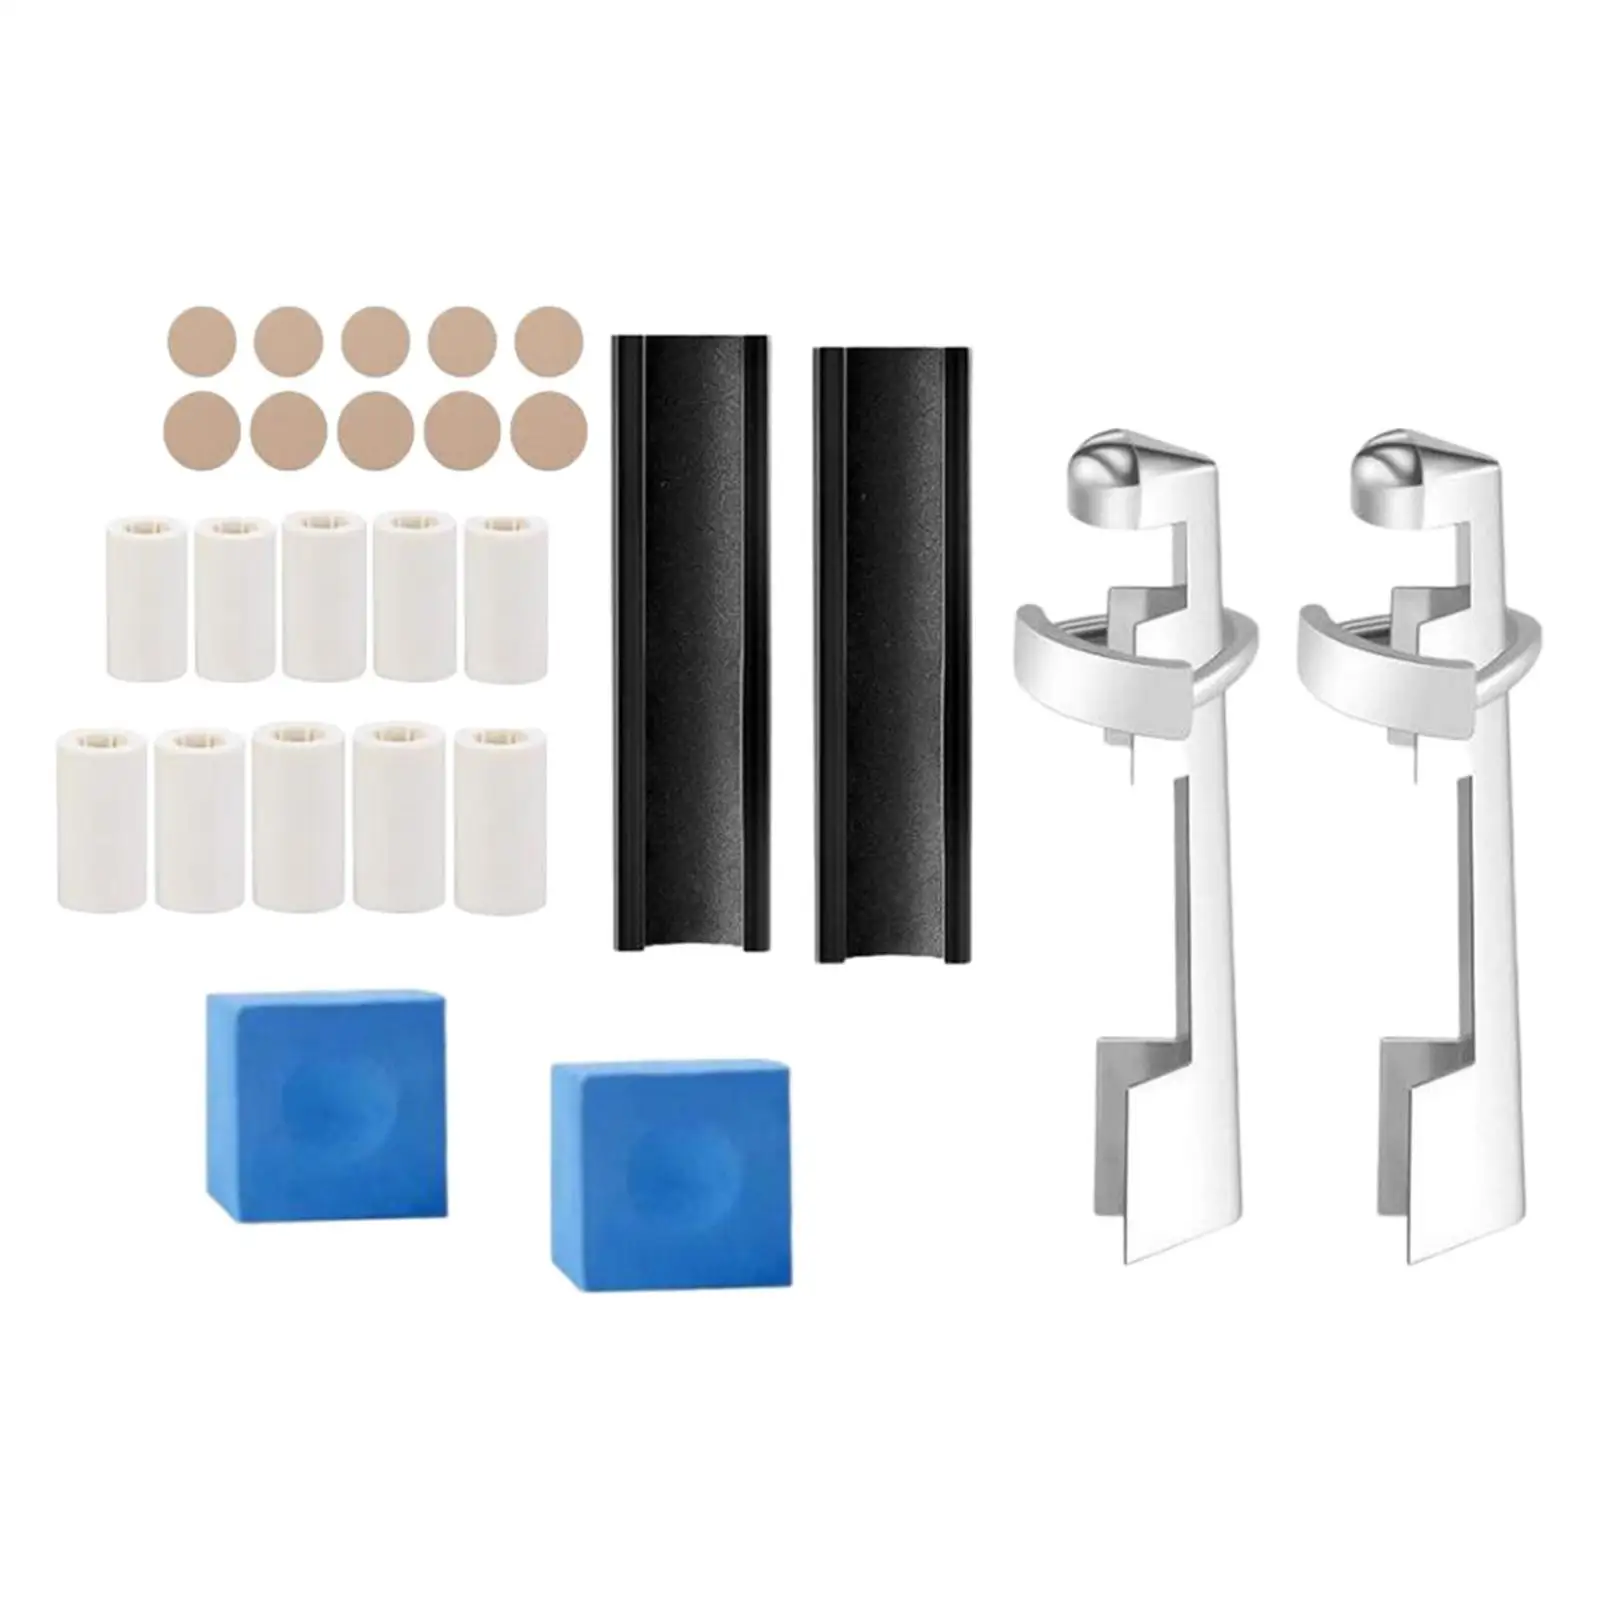 26x Pool Cue Tip Repair Kit Pool Cue Tip Clamp 22mm Chalk Cubes for Beginners Playing Game Training Outdoor Sports Practice